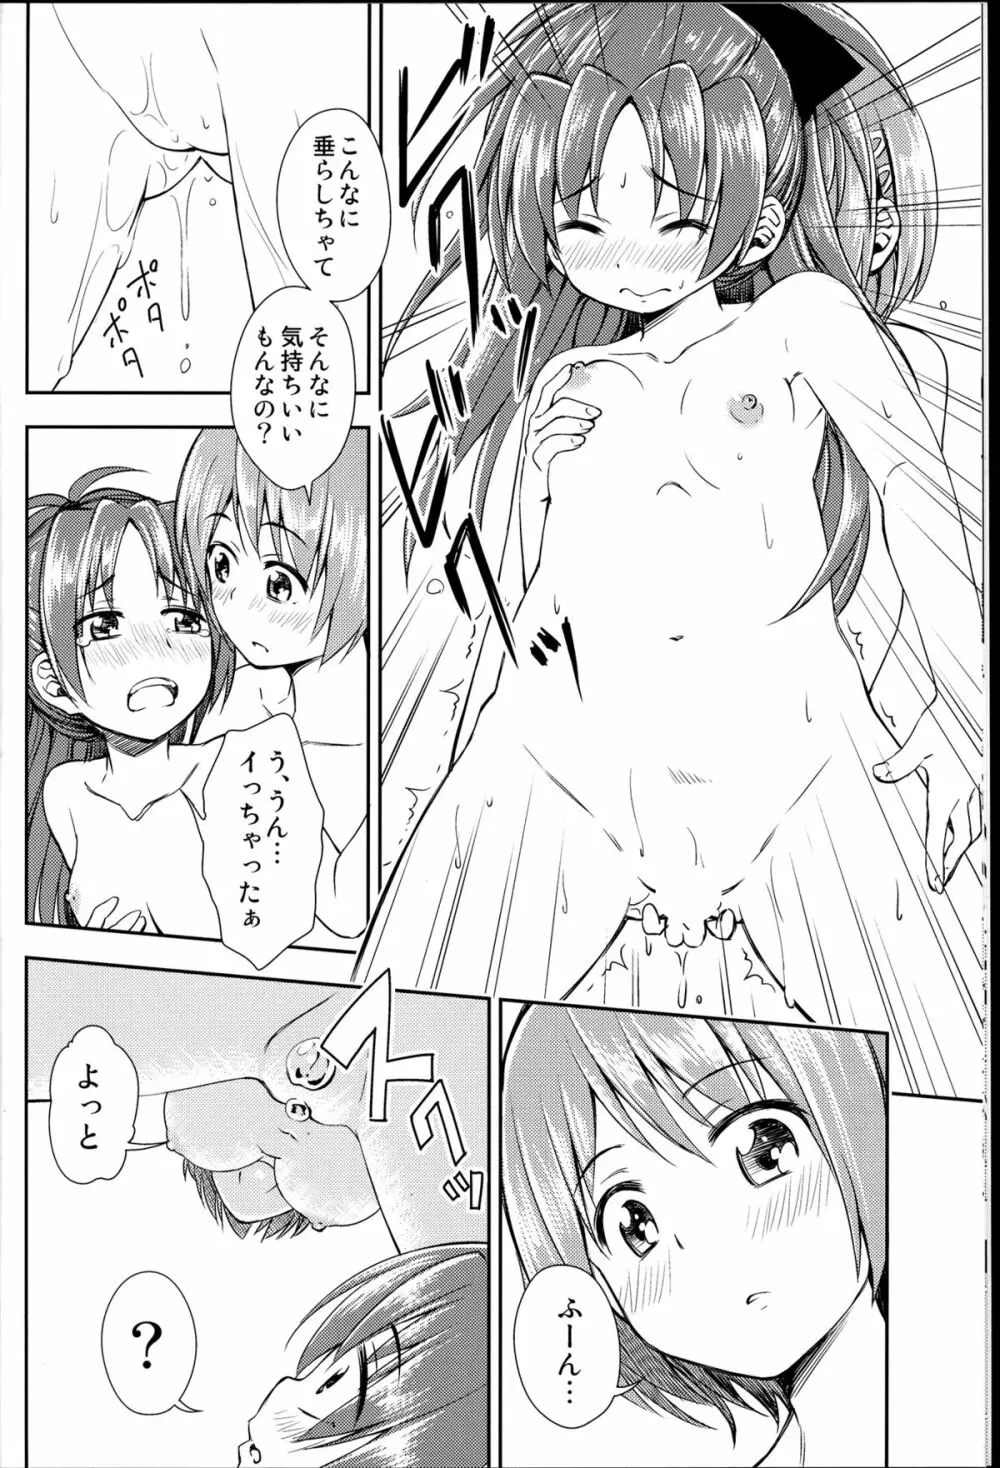 Lovely Girls' Lily vol.8 - page10